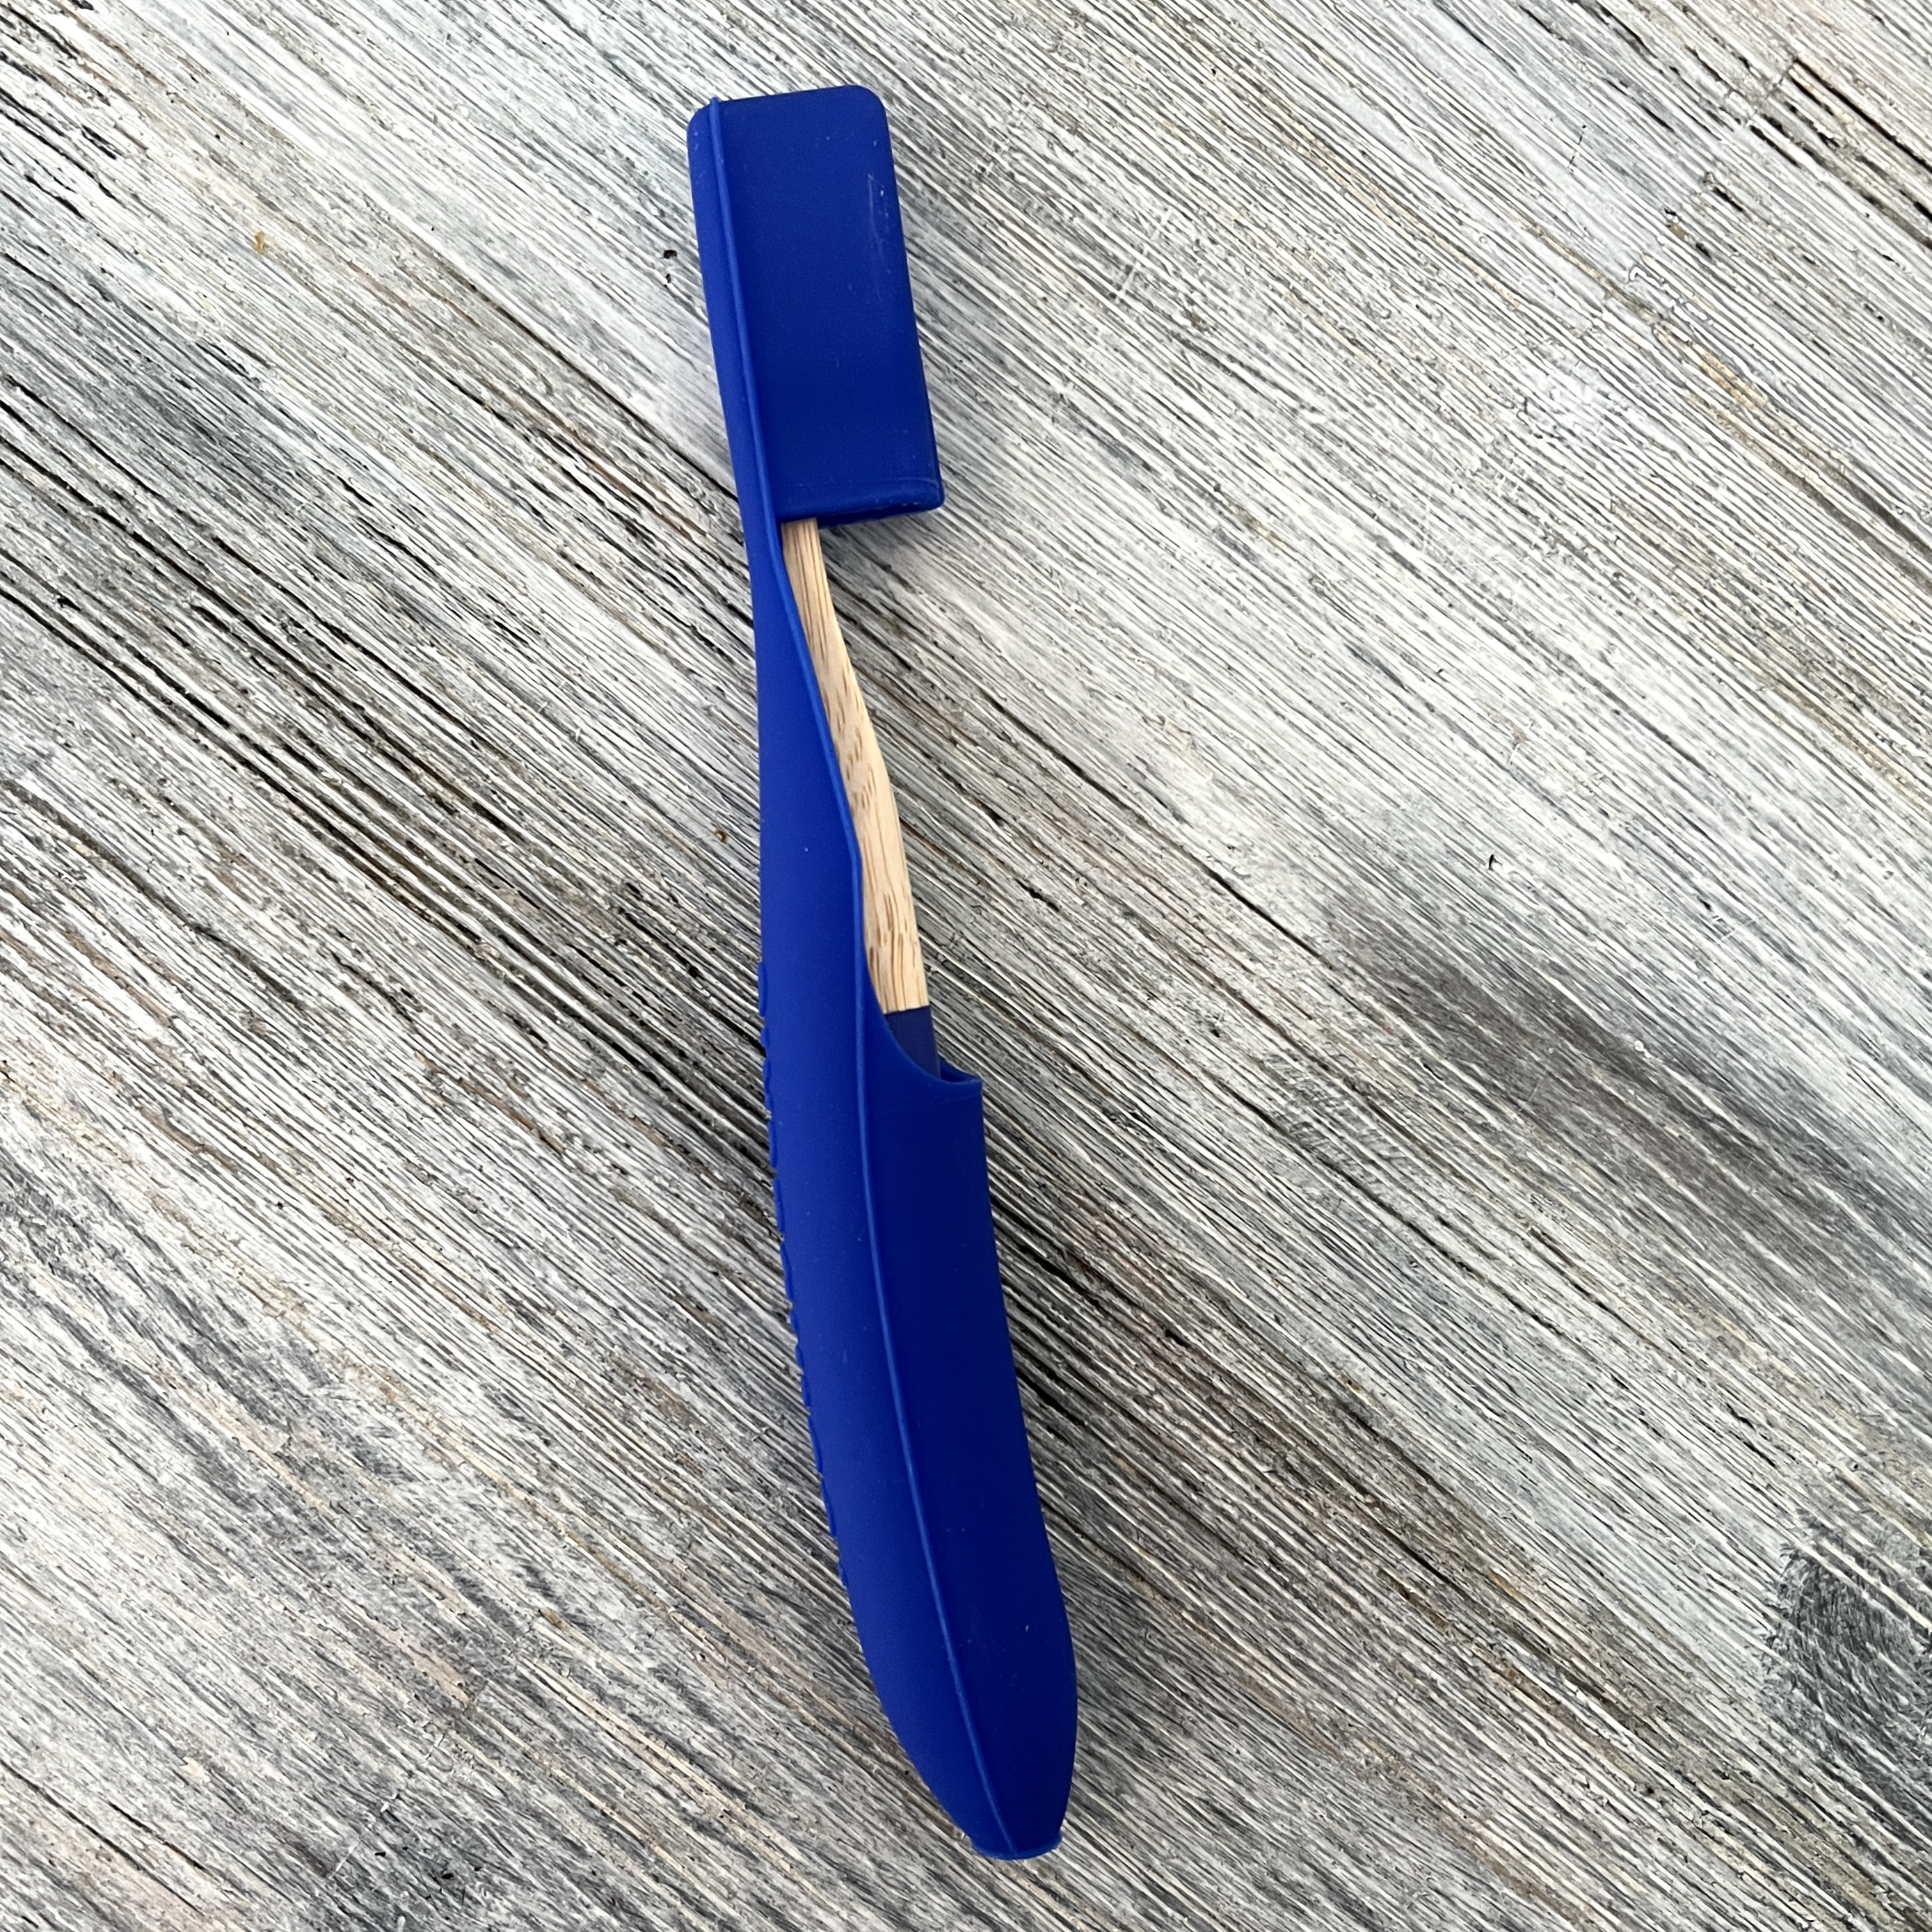 Toothbuckle Toothbrush for Bombay and Cedar Lifestyle Box January 2022